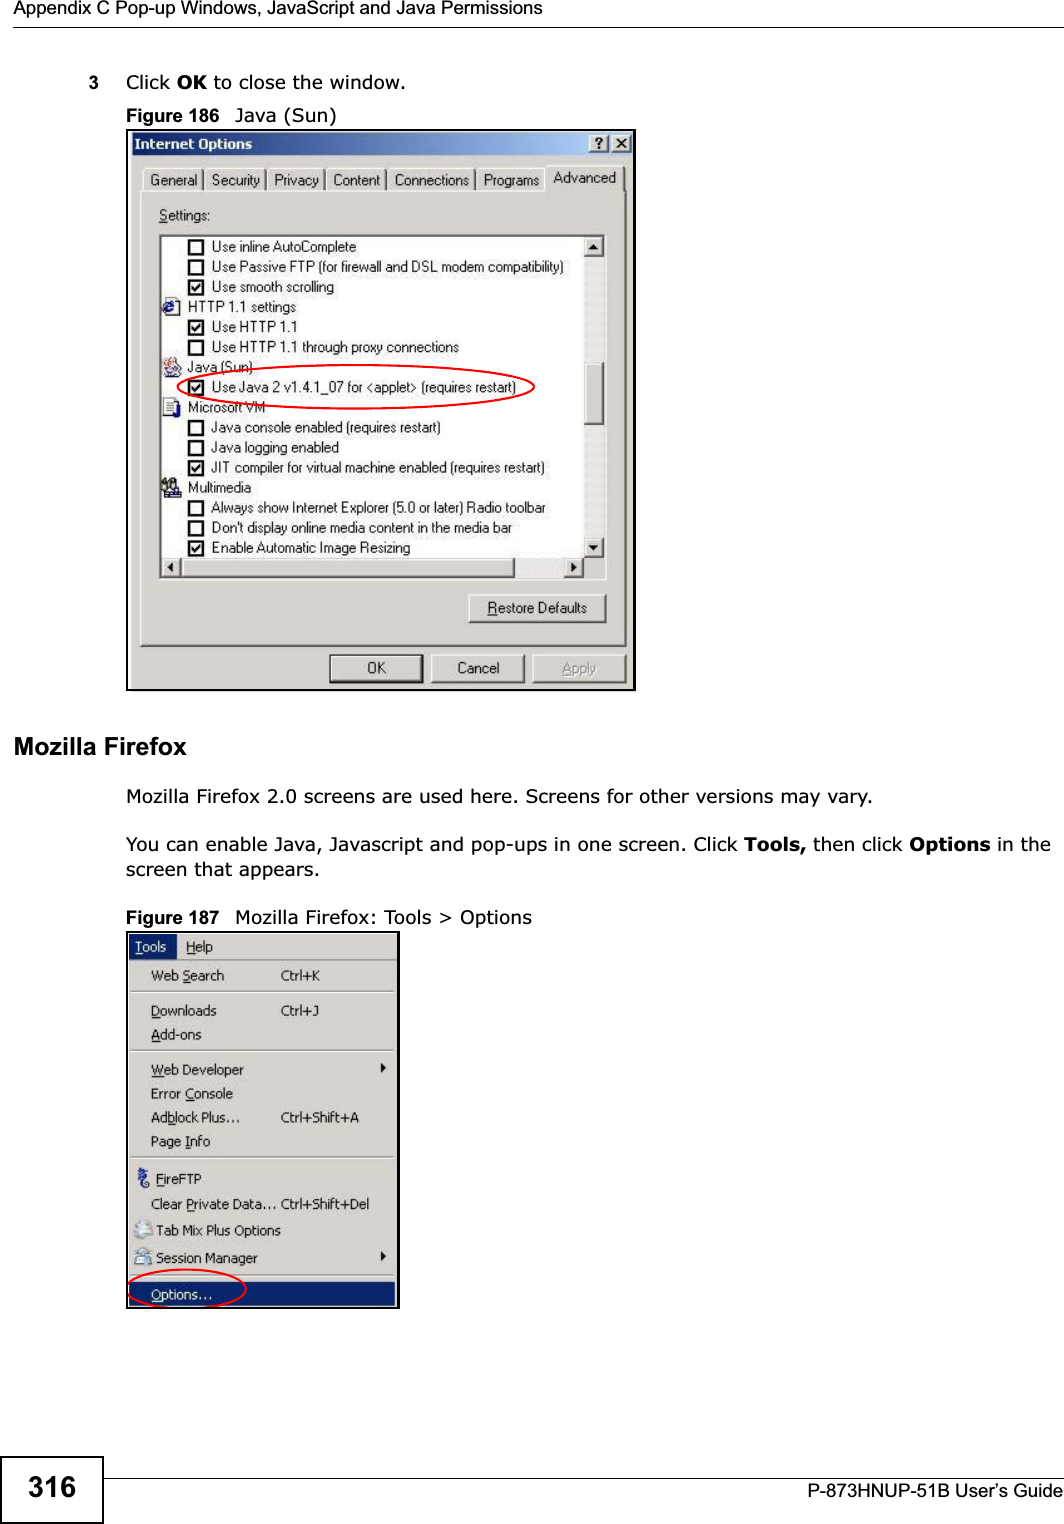 Appendix C Pop-up Windows, JavaScript and Java PermissionsP-873HNUP-51B User’s Guide3163Click OK to close the window.Figure 186   Java (Sun)Mozilla FirefoxMozilla Firefox 2.0 screens are used here. Screens for other versions may vary. You can enable Java, Javascript and pop-ups in one screen. Click Tools, then click Options in the screen that appears.Figure 187   Mozilla Firefox: Tools &gt; Options